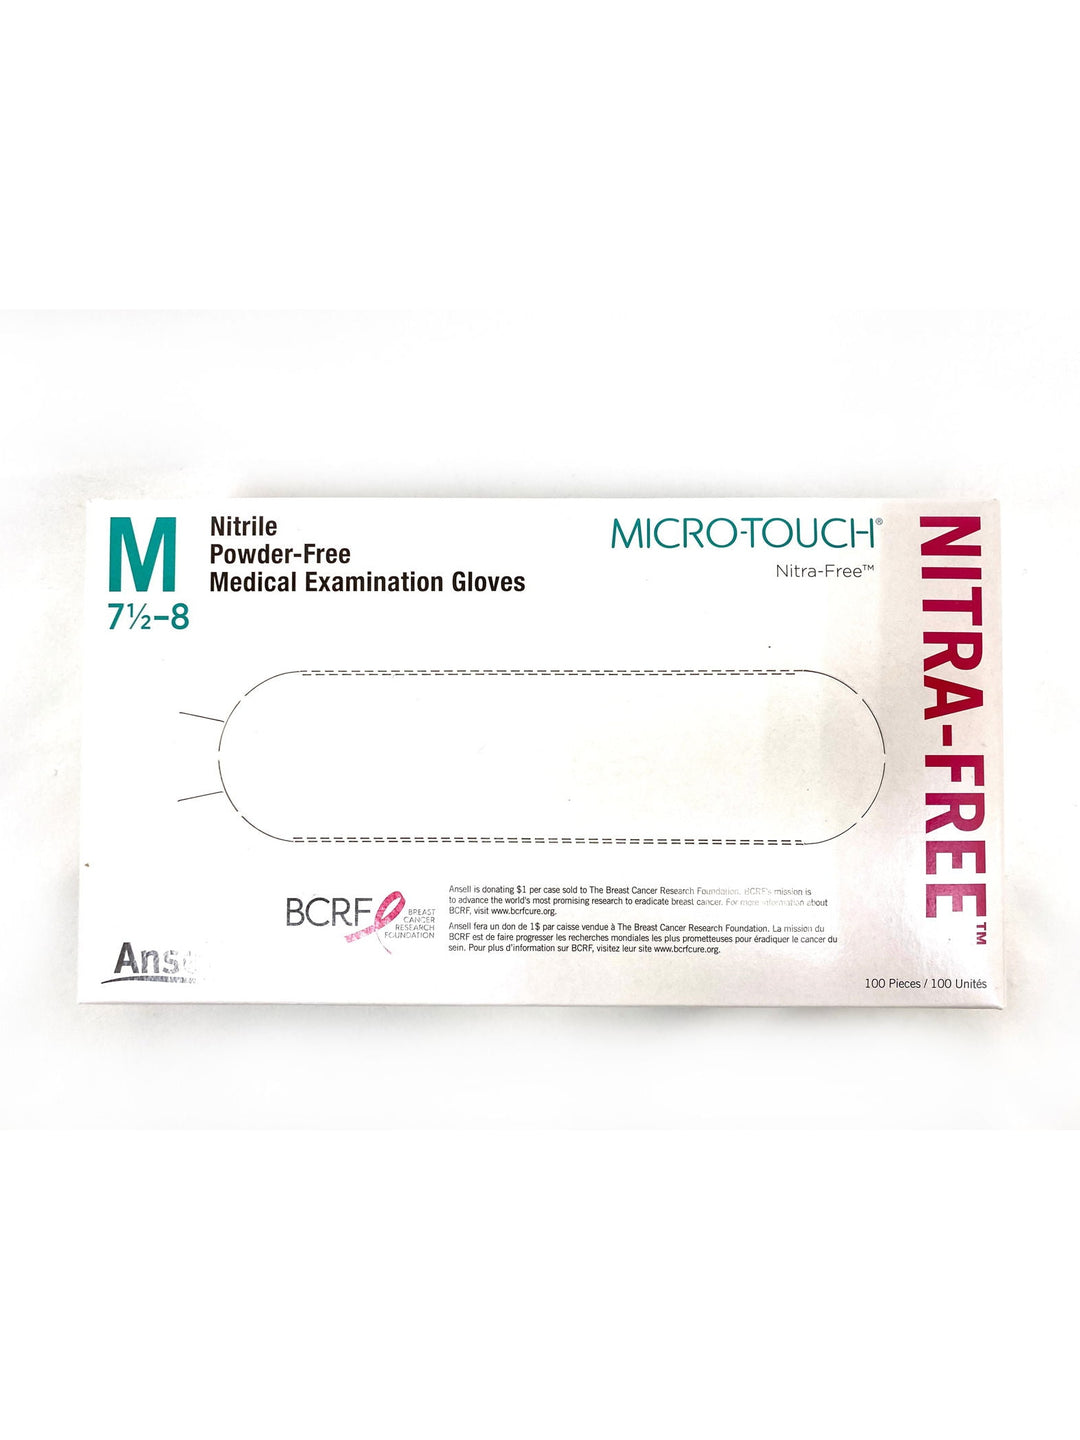 Micro-touch Nitra-Free - The Kennedy Collective Thrift - 